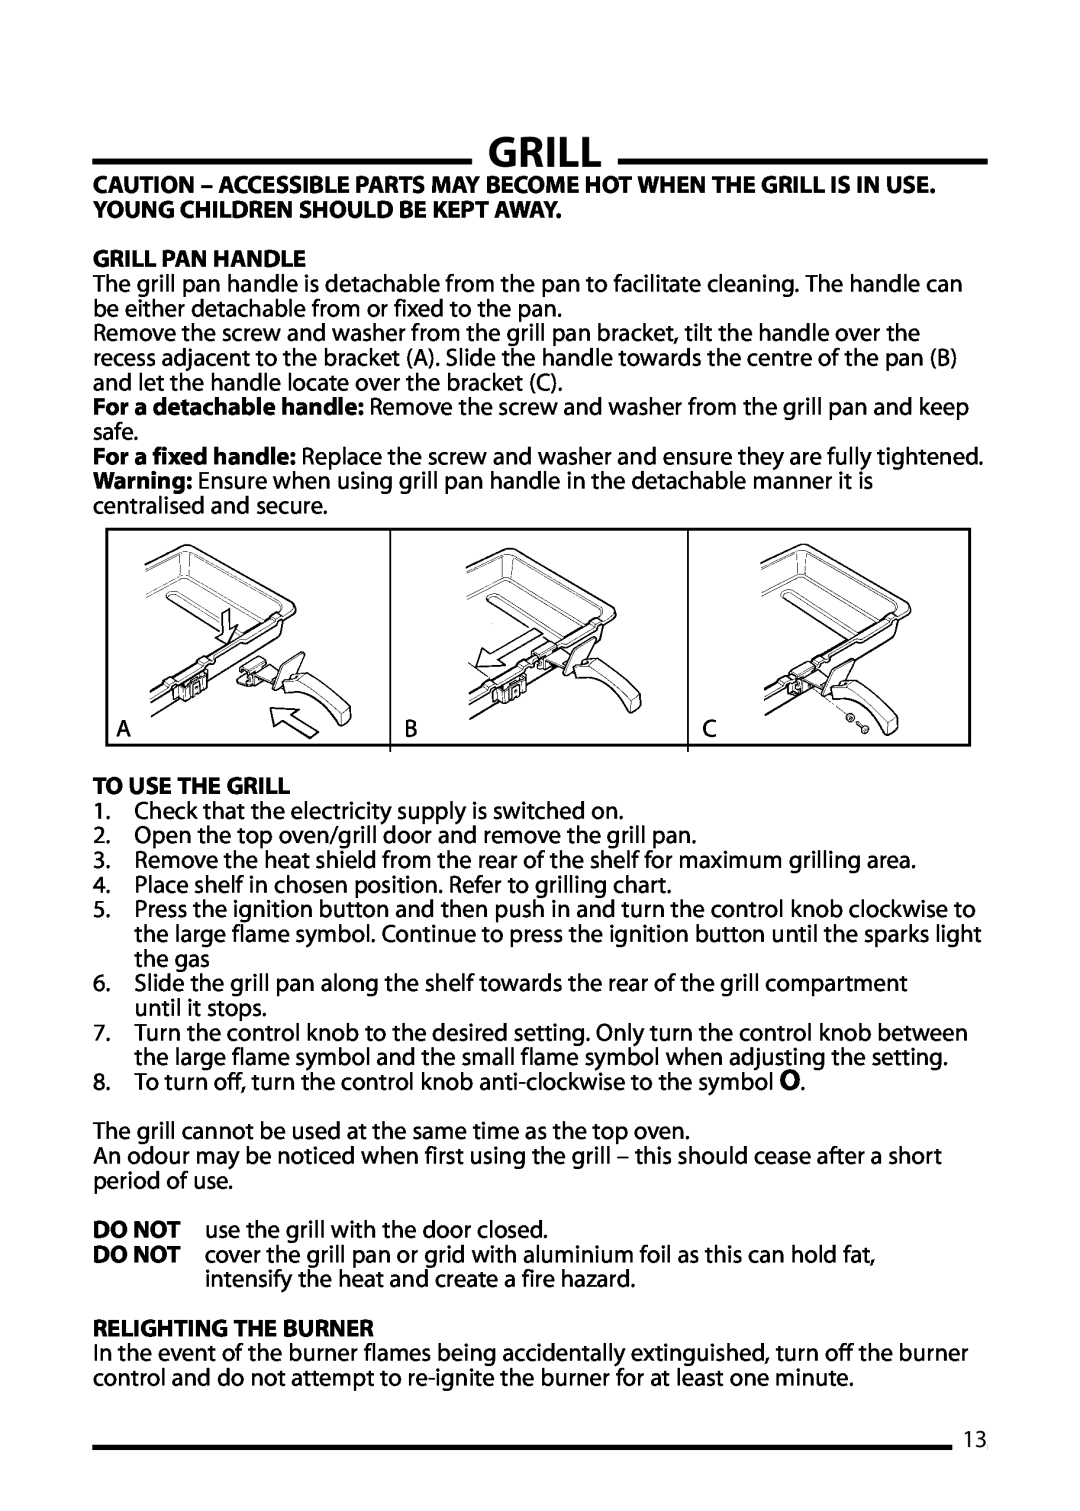 Cannon 10410G, ICON 600 installation instructions Grill Pan Handle, To Use The Grill, Relighting The Burner 